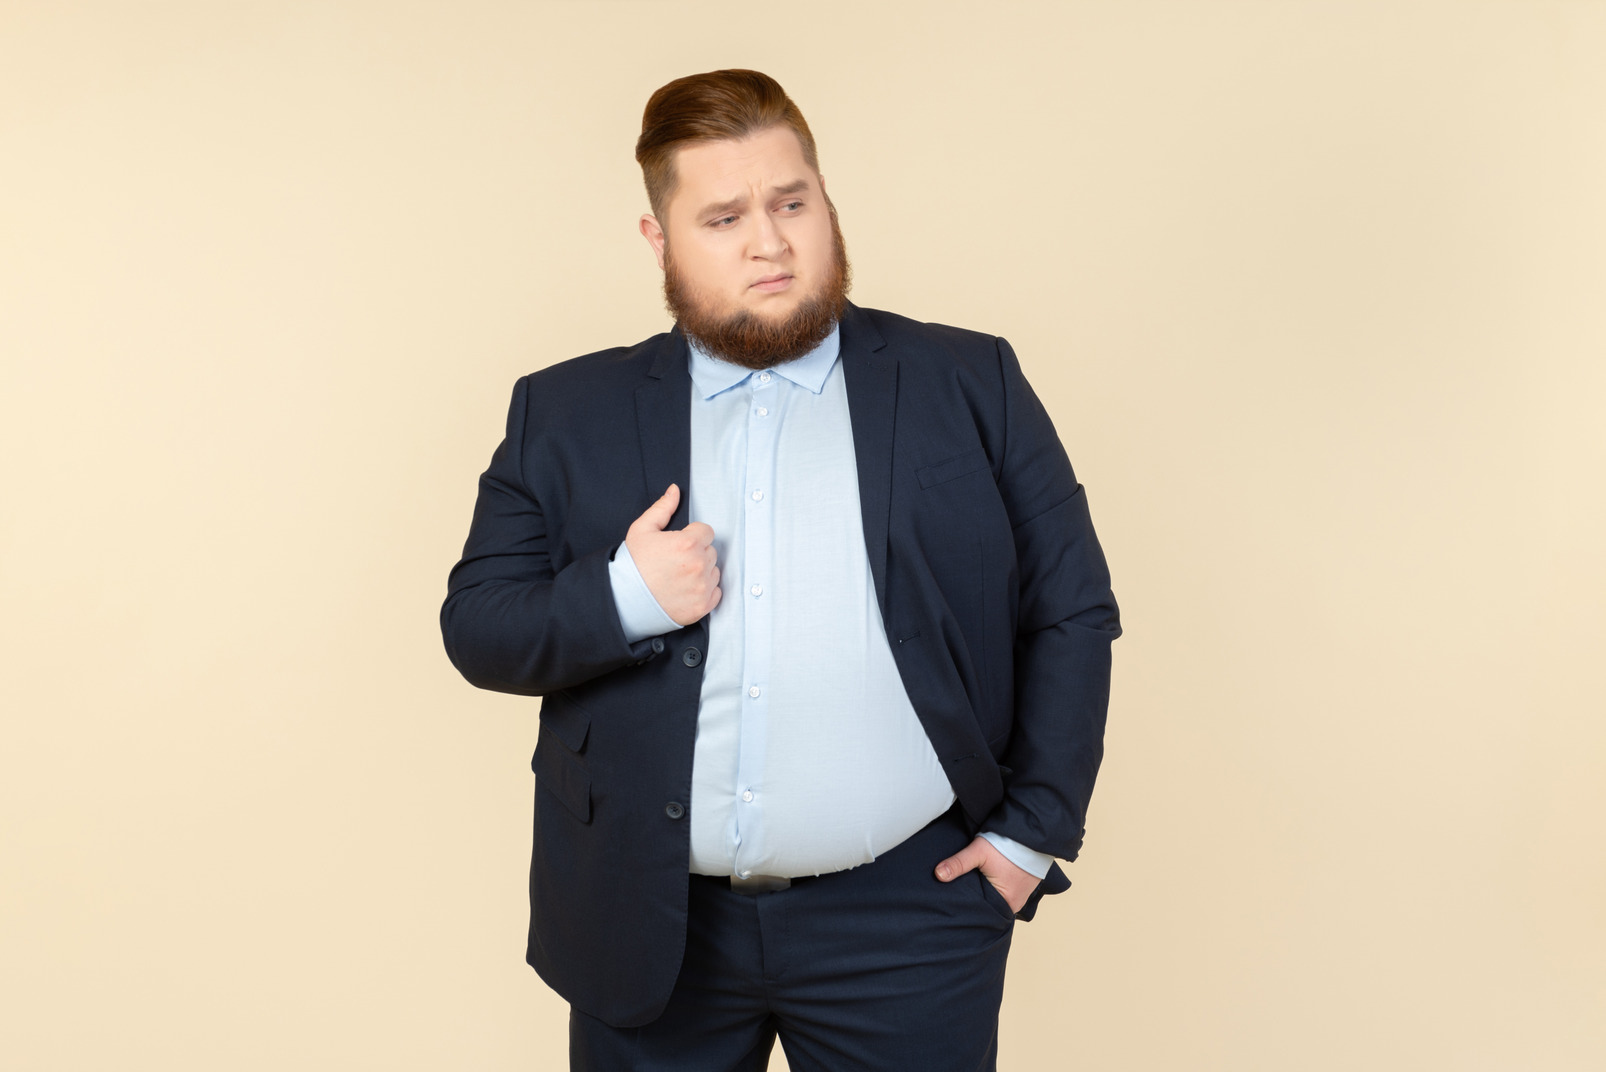 Young overweight man in suit touching jacket with a hand